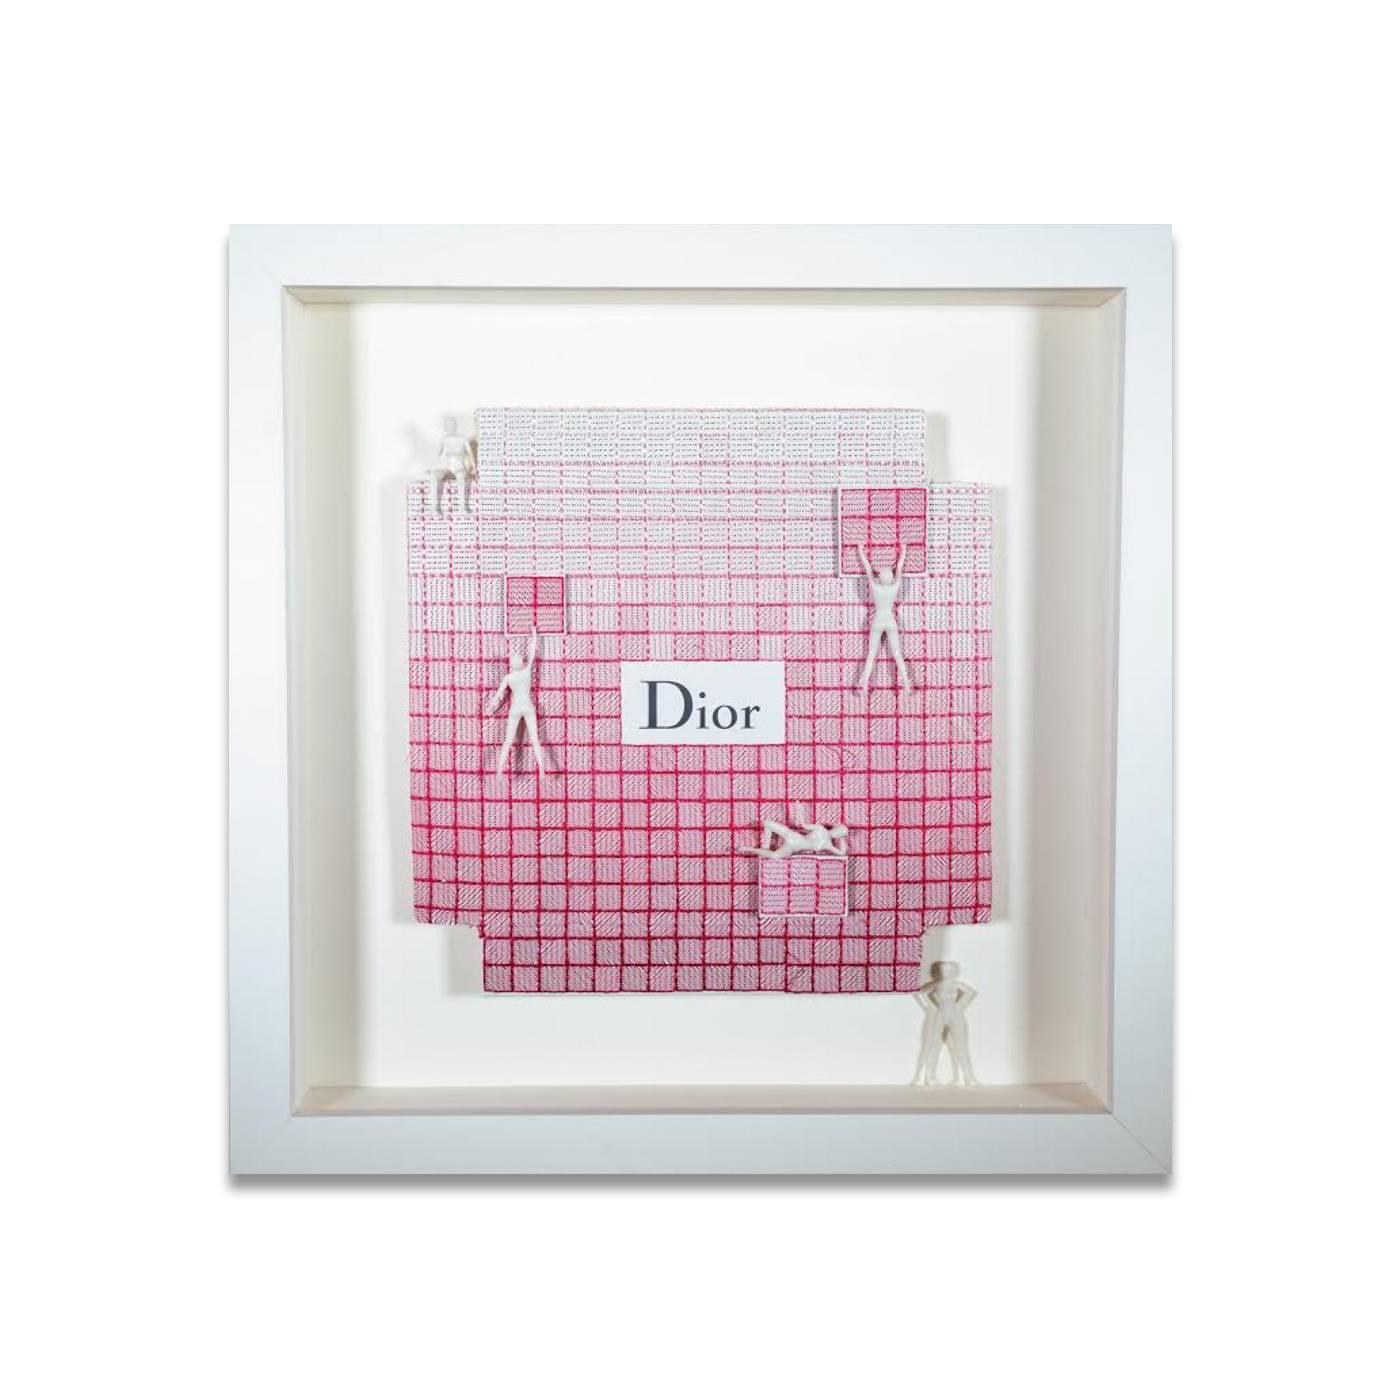 DIOR OMBRE PINK - Mixed Media Art by Stephen Wilson